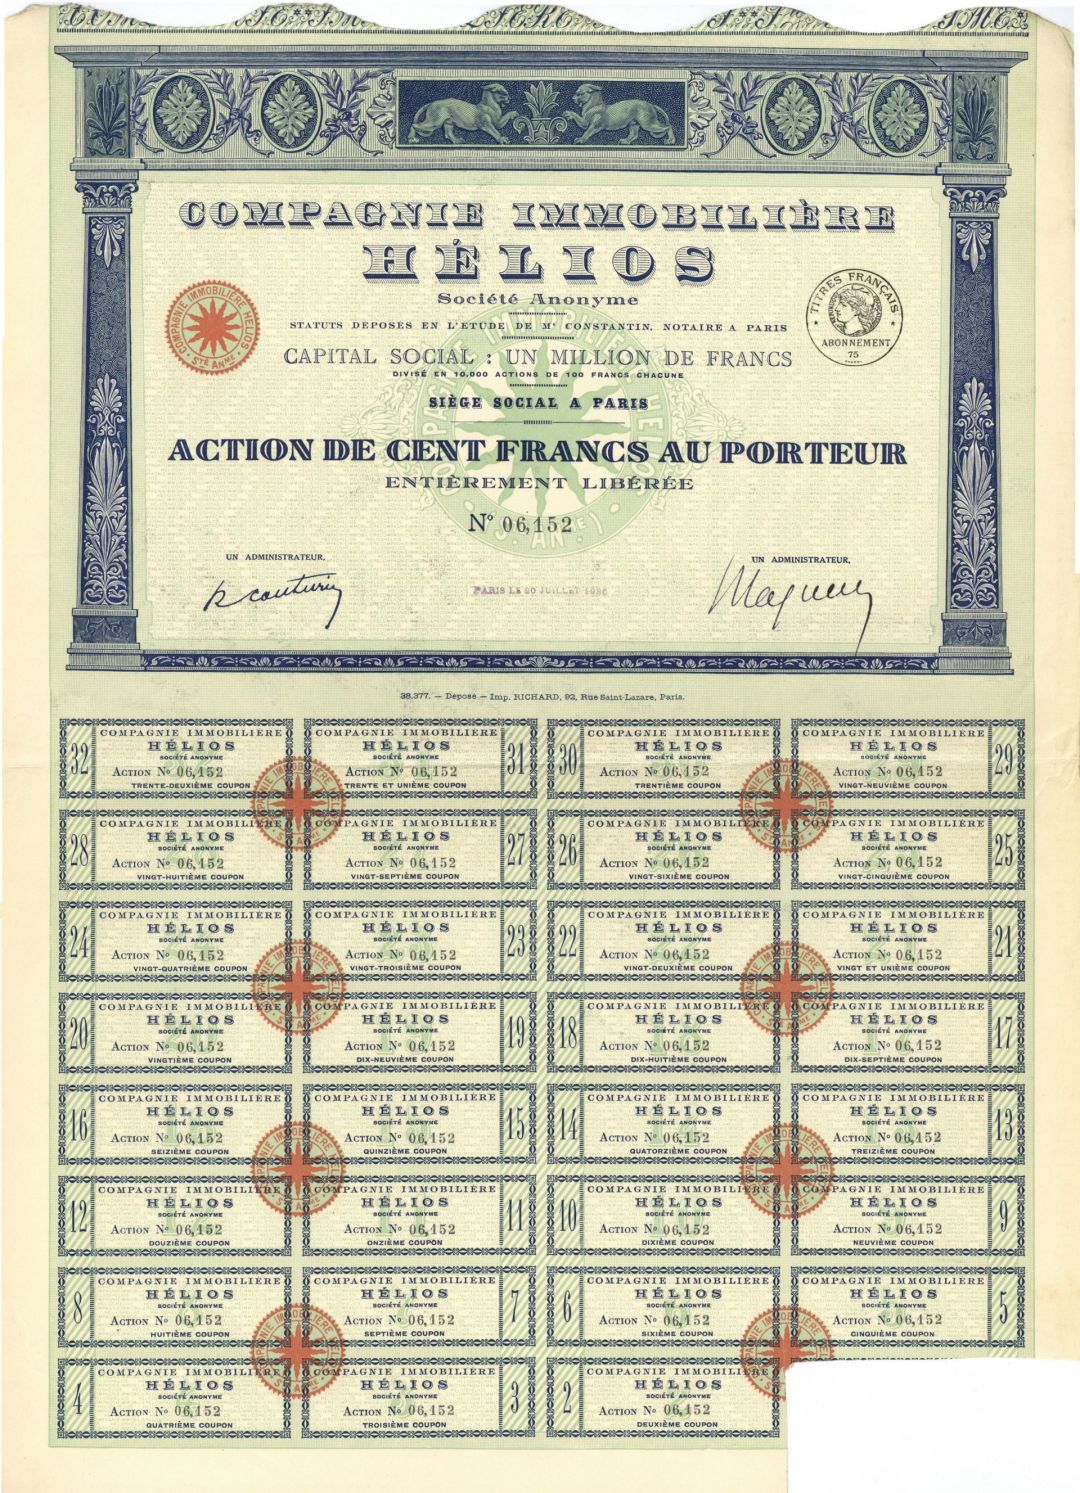 Compagnie Immobiliere Helios - Stock Certificate